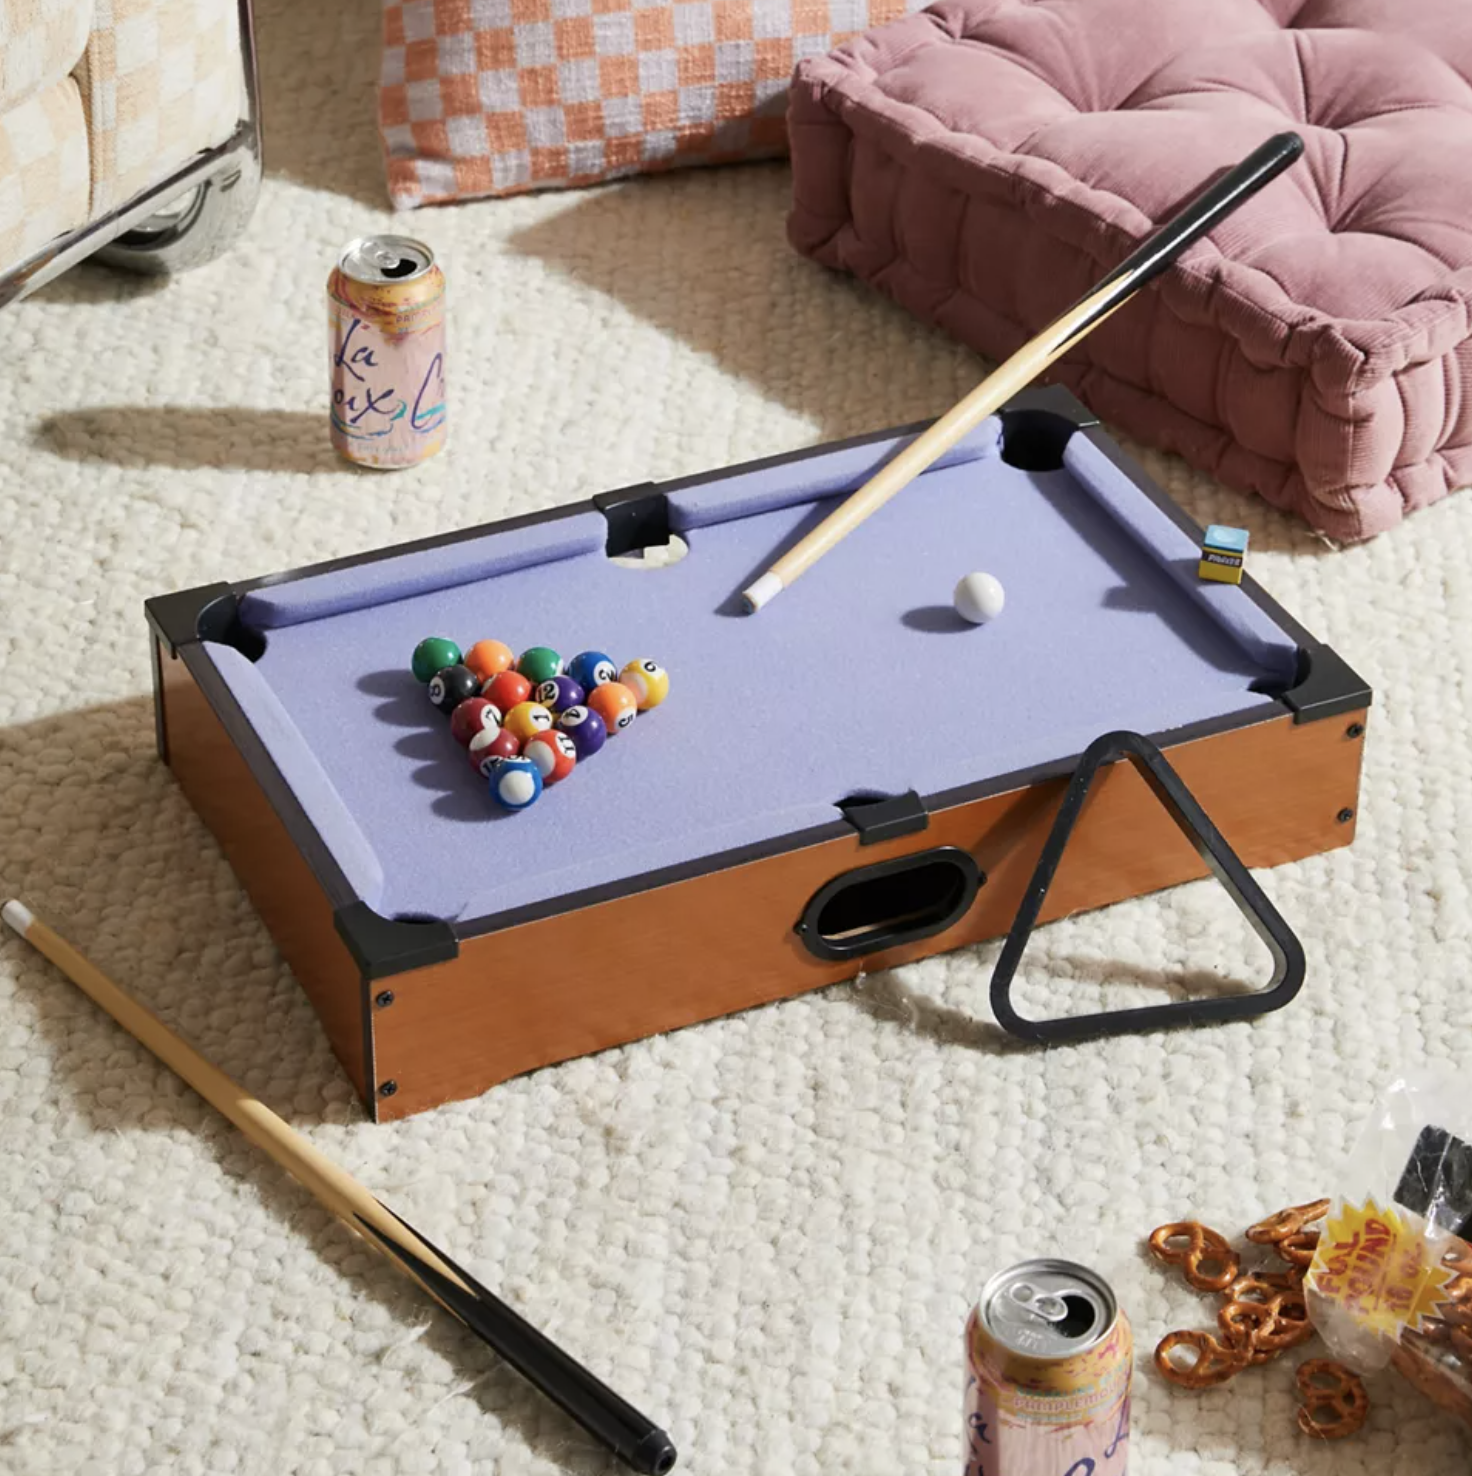 The pool table on a bedroom floor